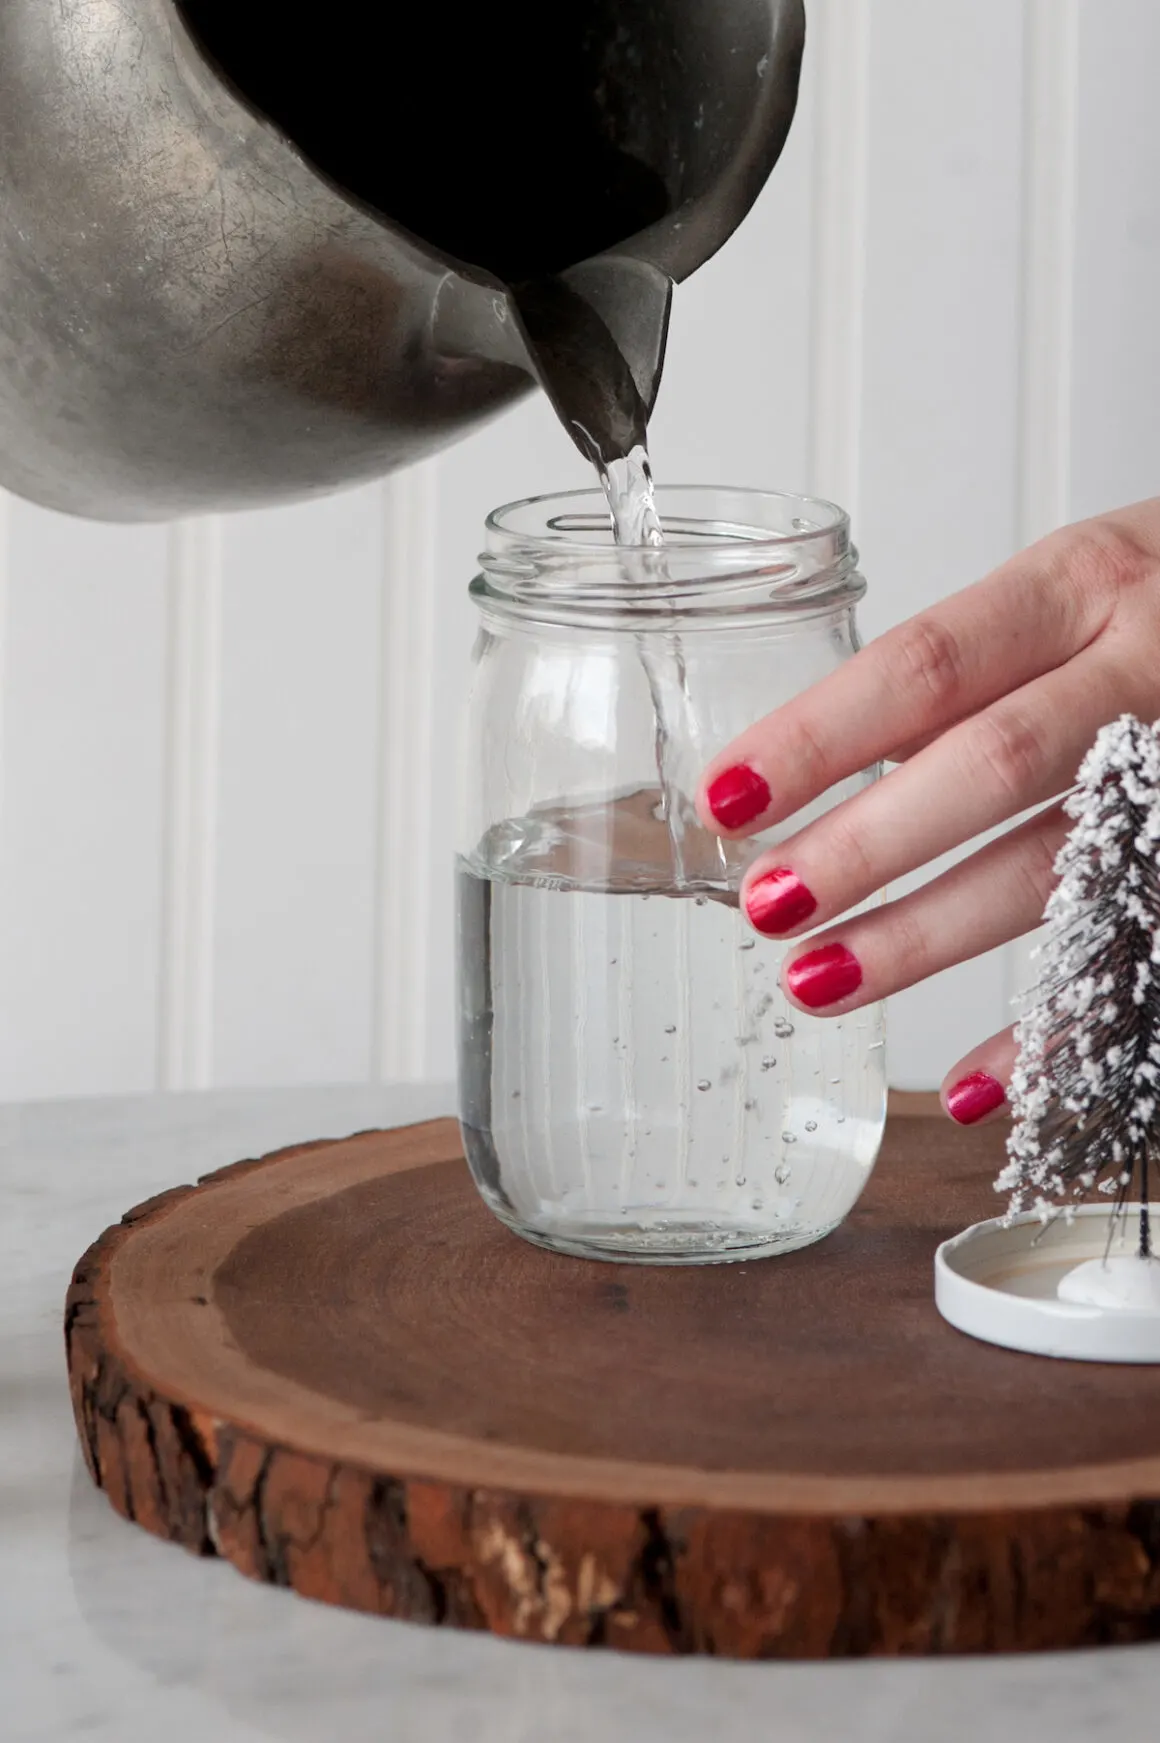 Female hands wearing red nail polish pouring water into a mason jar to make a snow globe